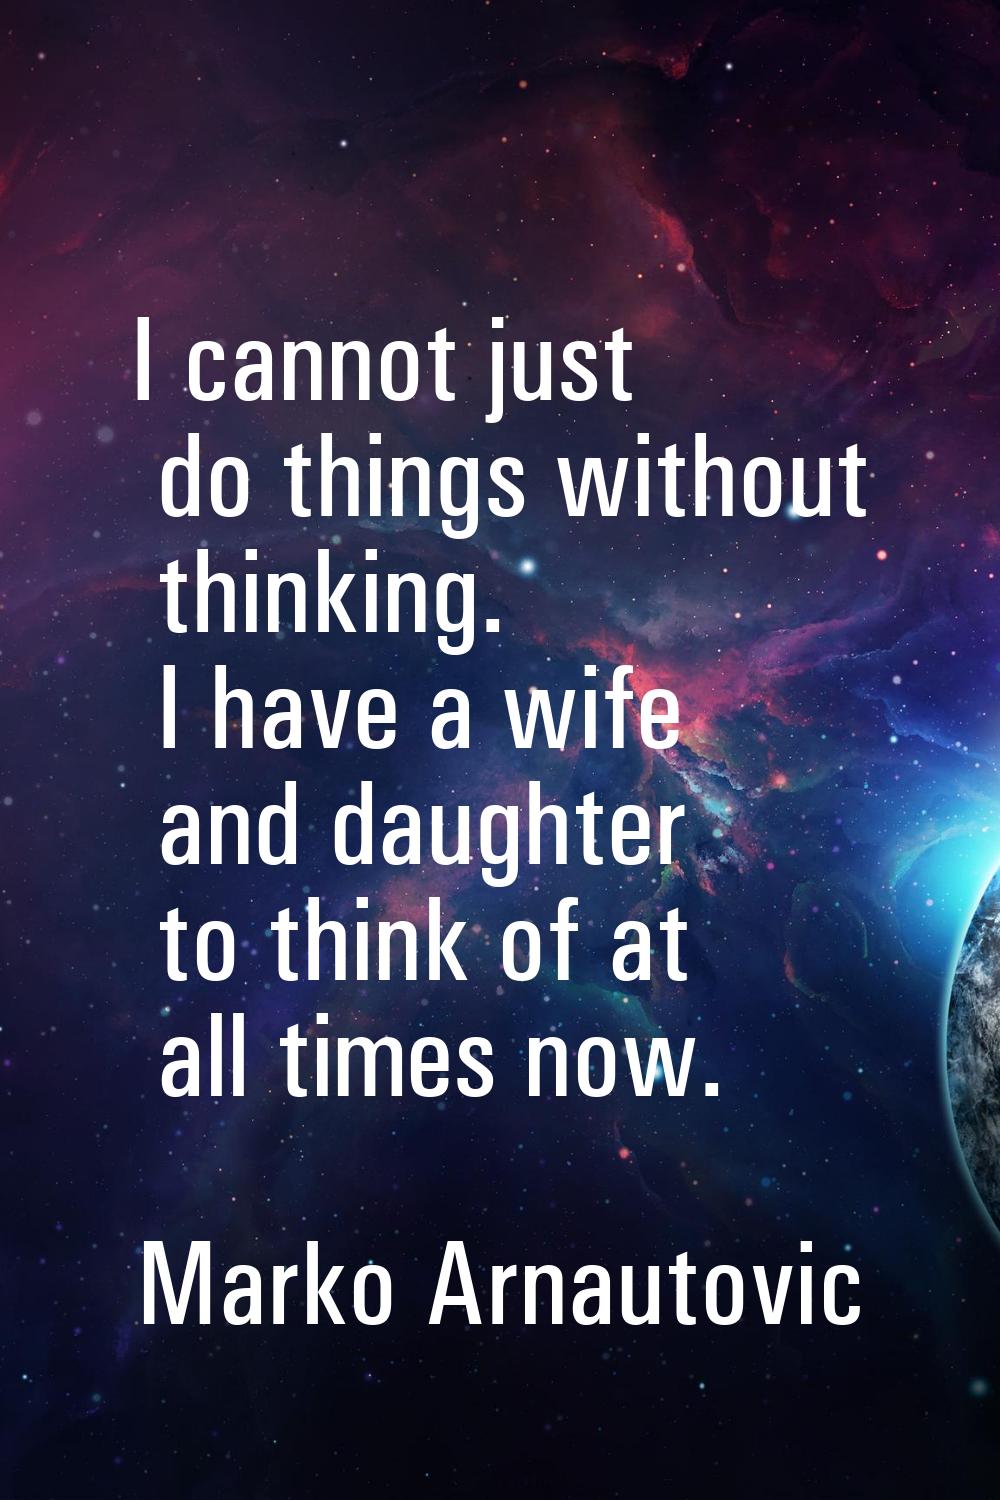 I cannot just do things without thinking. I have a wife and daughter to think of at all times now.